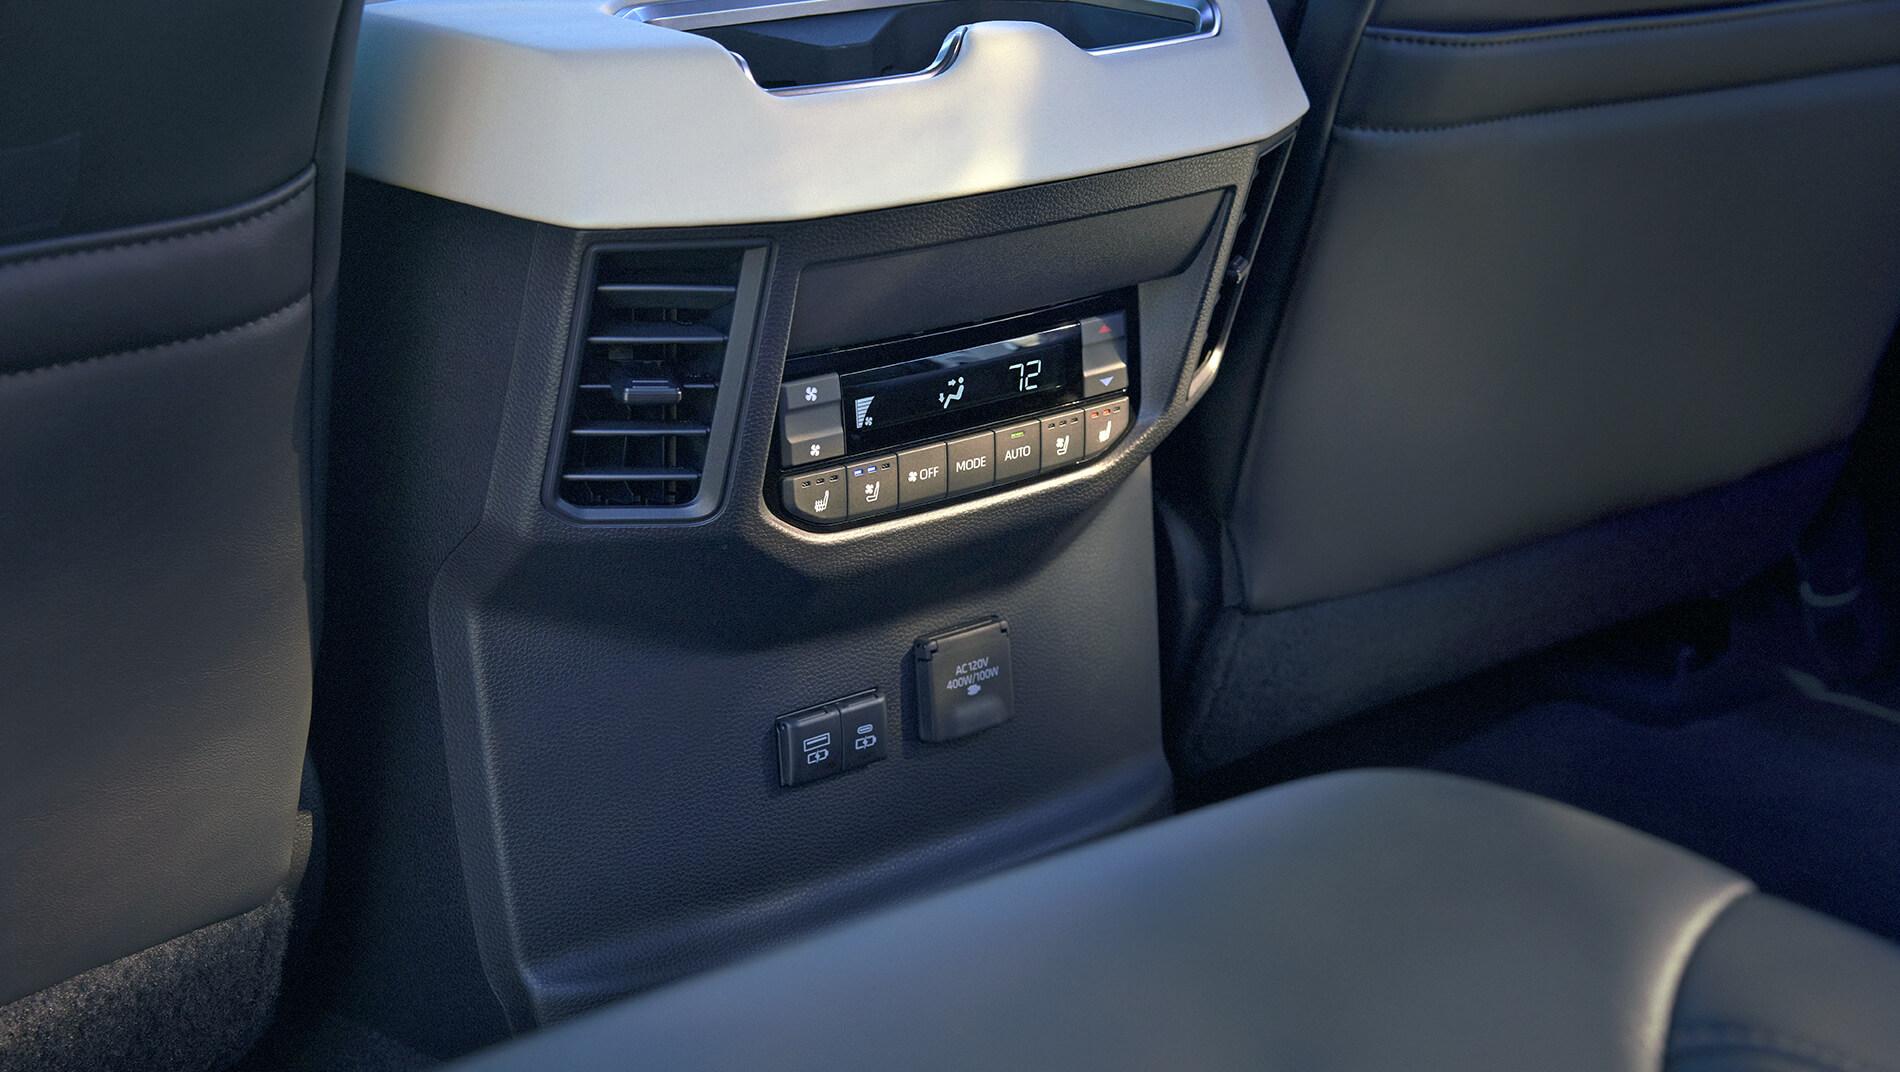 Toyota Sequoia backseat air control and aux charging station